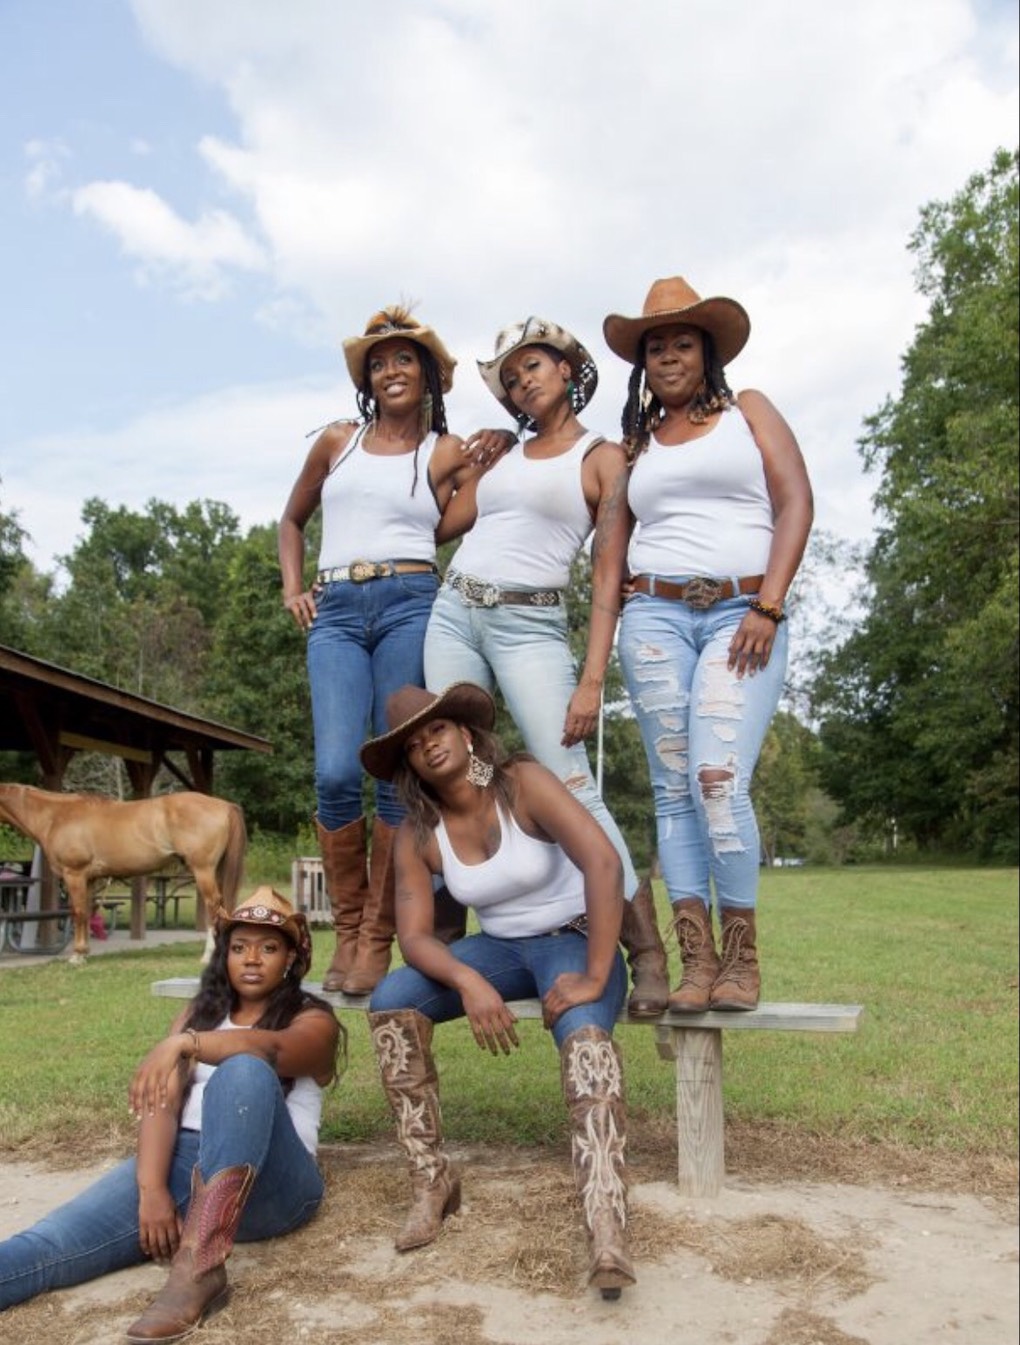 Meet The Only All Black Female Rodeo Squad The Cowgirls Of Color Travel Noire 1401